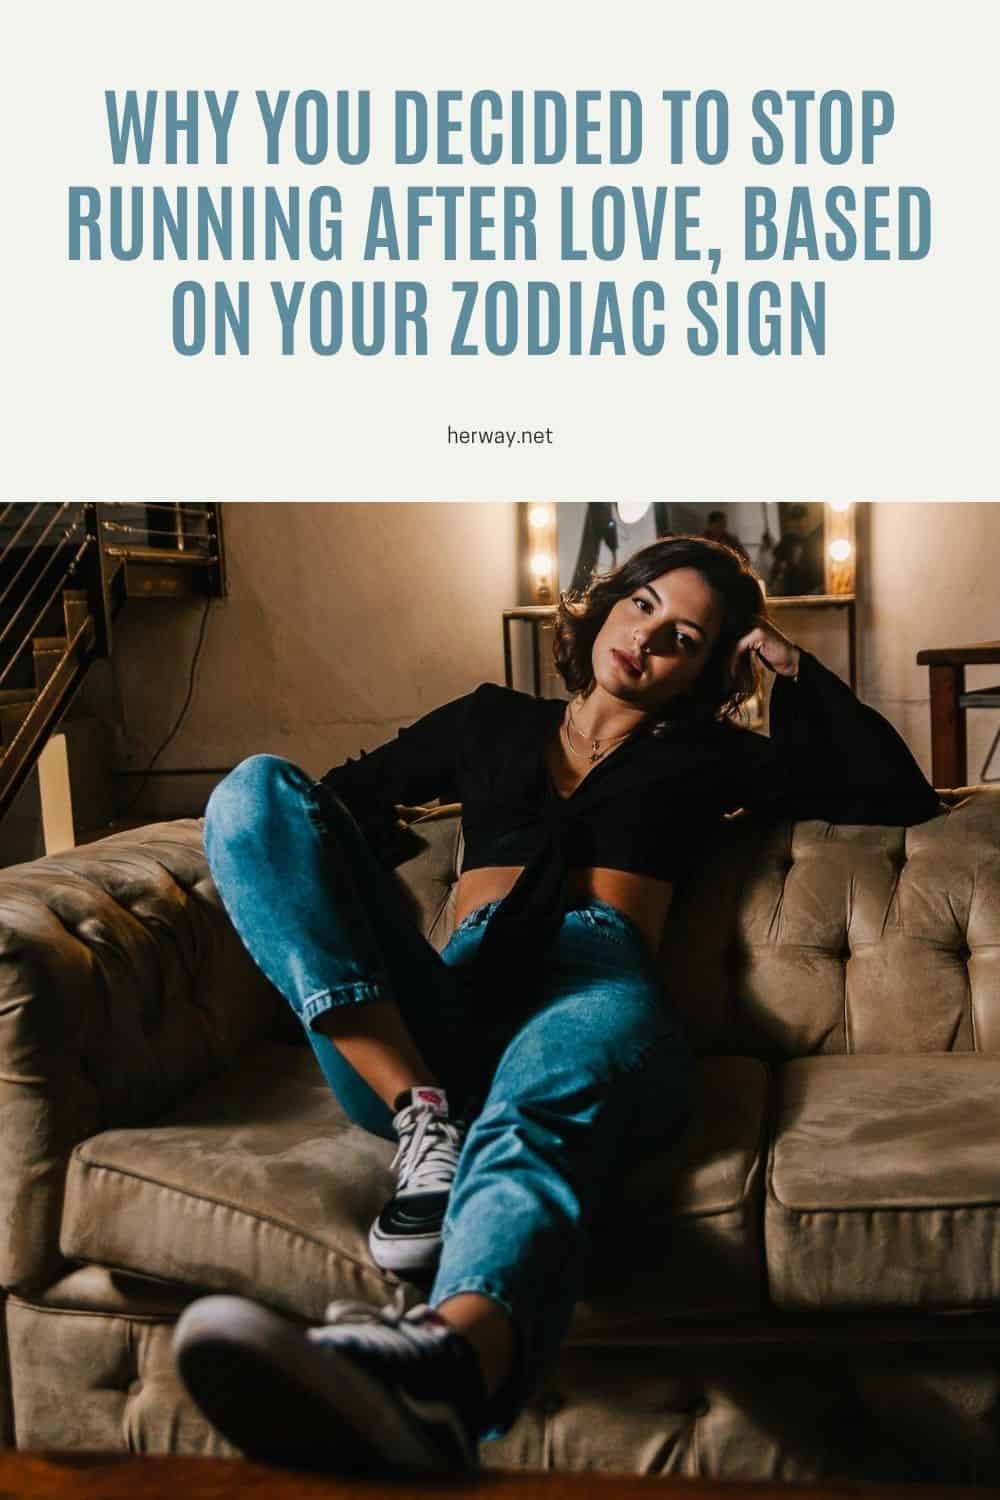 Why You Decided To Stop Running After Love, Based On Your Zodiac Sign